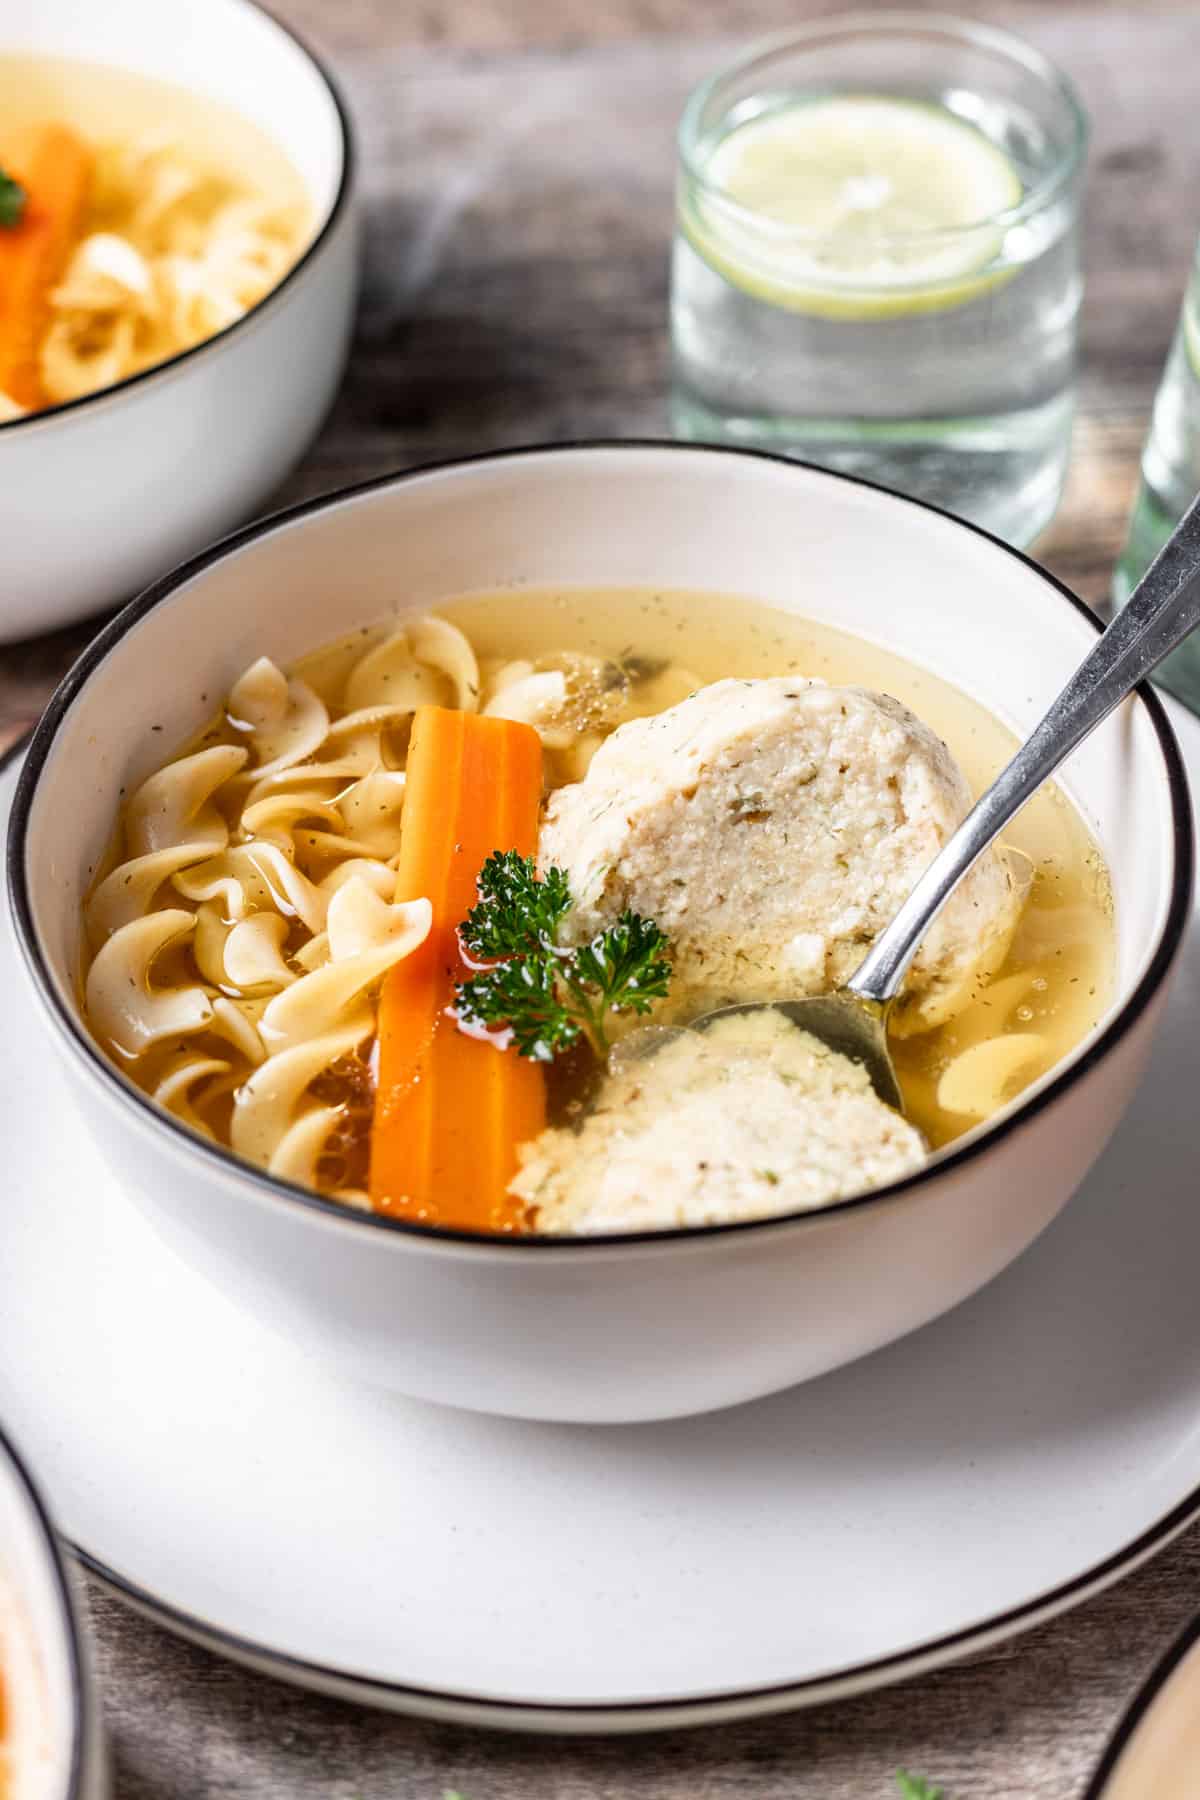 Instant pot matzo ball soup in a white bowl with a spoon and a glass of water next to it.